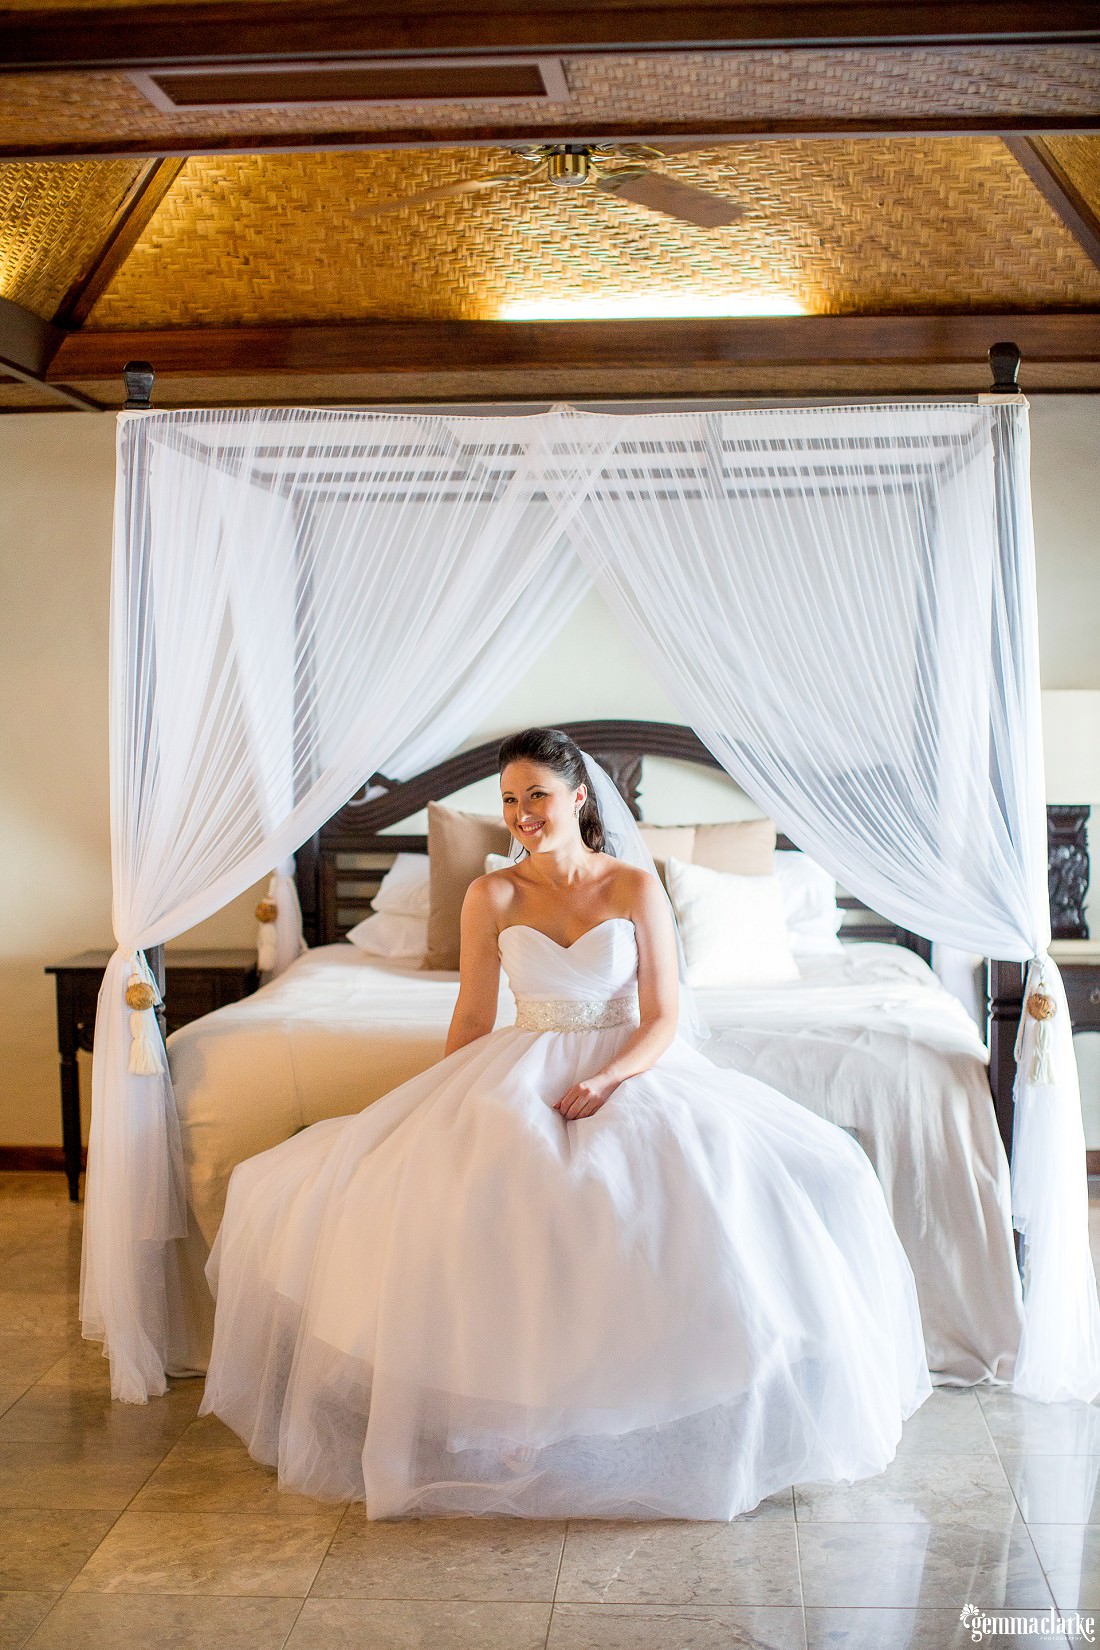 A smiling bride in her bridal gown sitting on a four poster bed with white canopy - South Pacific Wedding